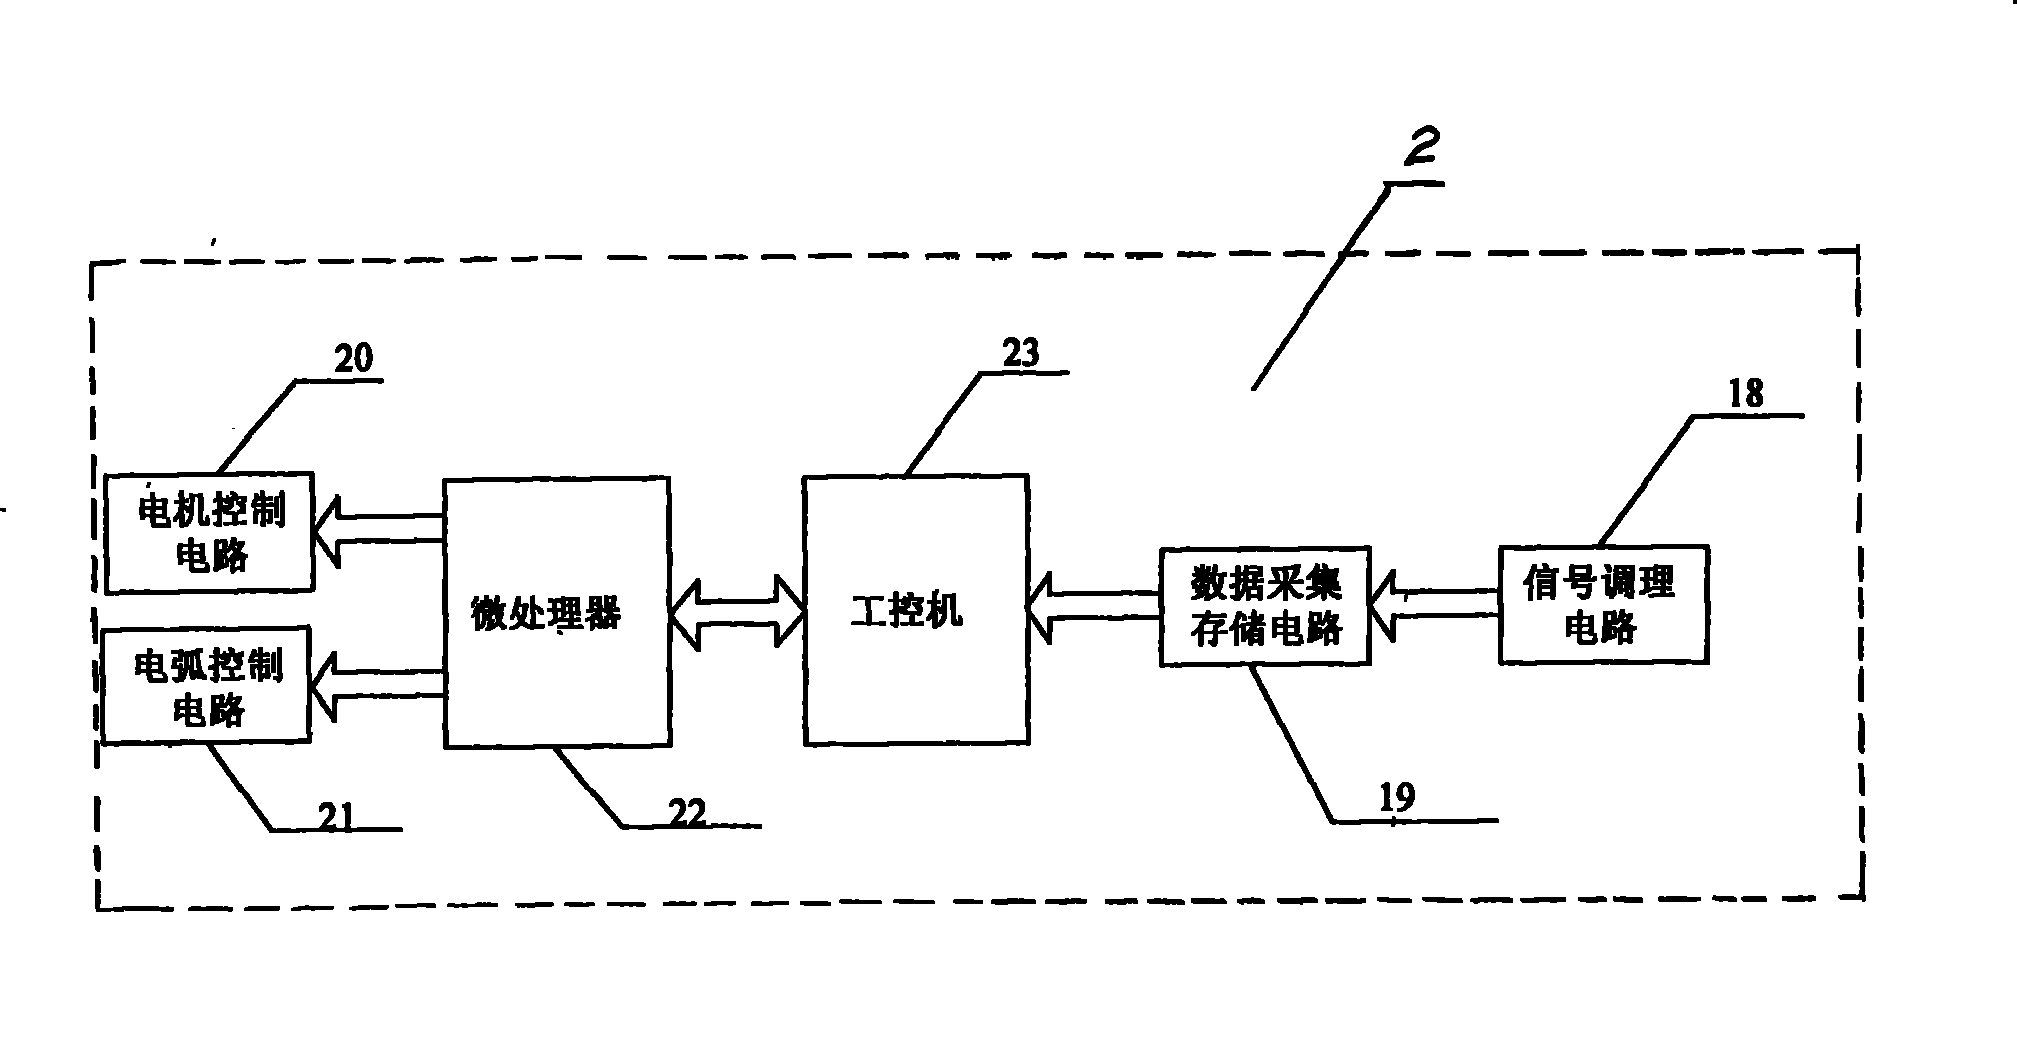 Electric arc test method and apparatus for contact head disjunction of switch apparatus